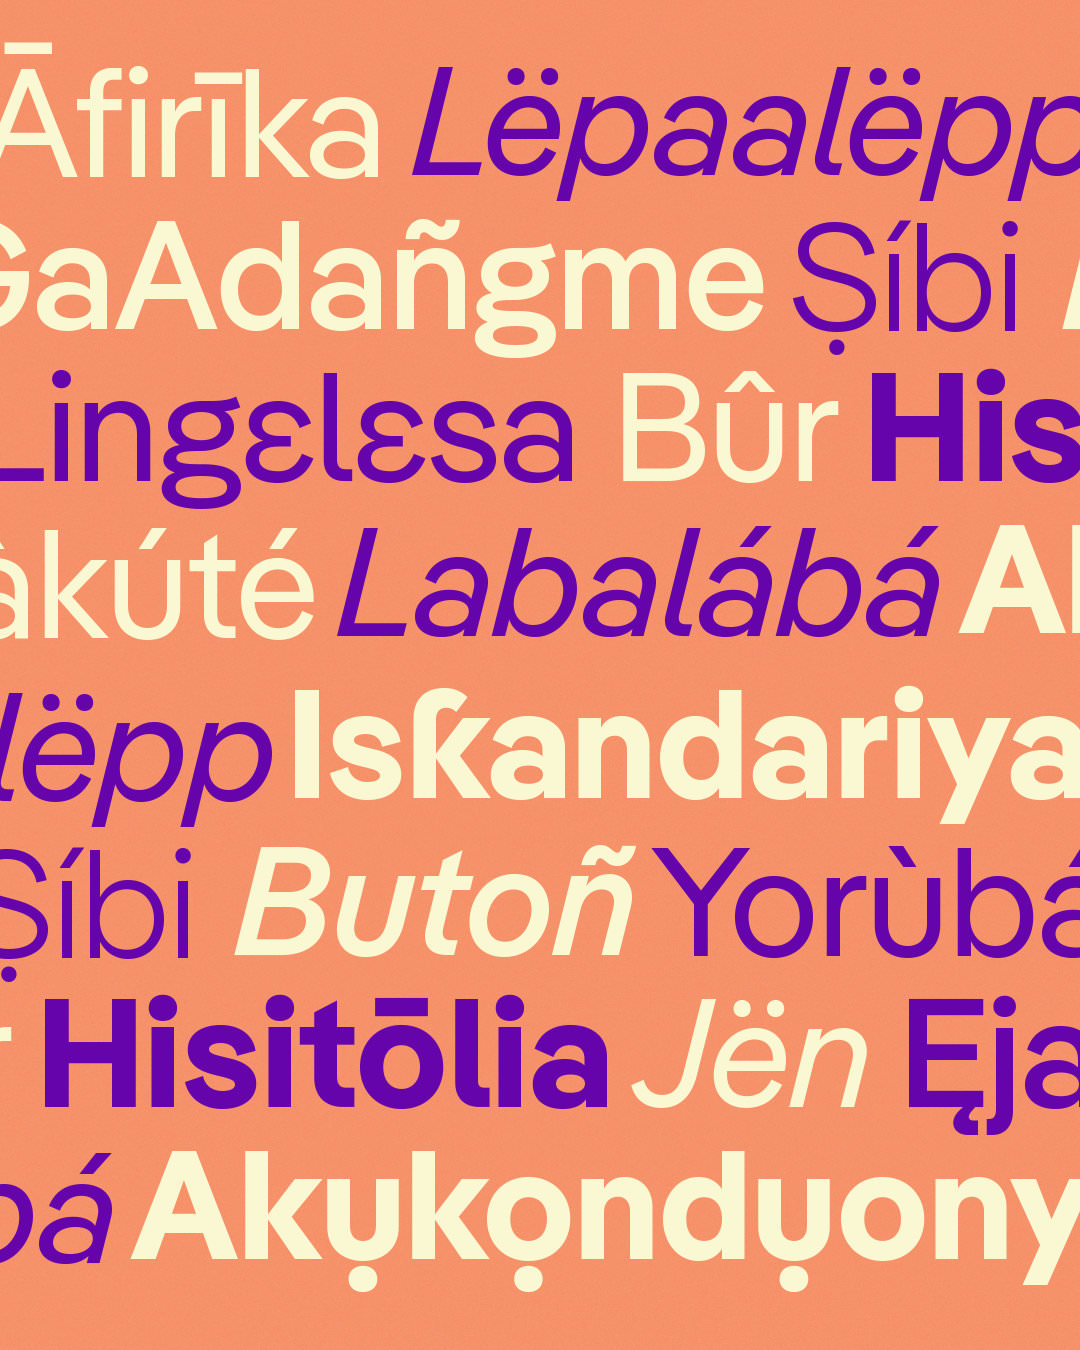 Pangea Afrikan now available as Variable fonts